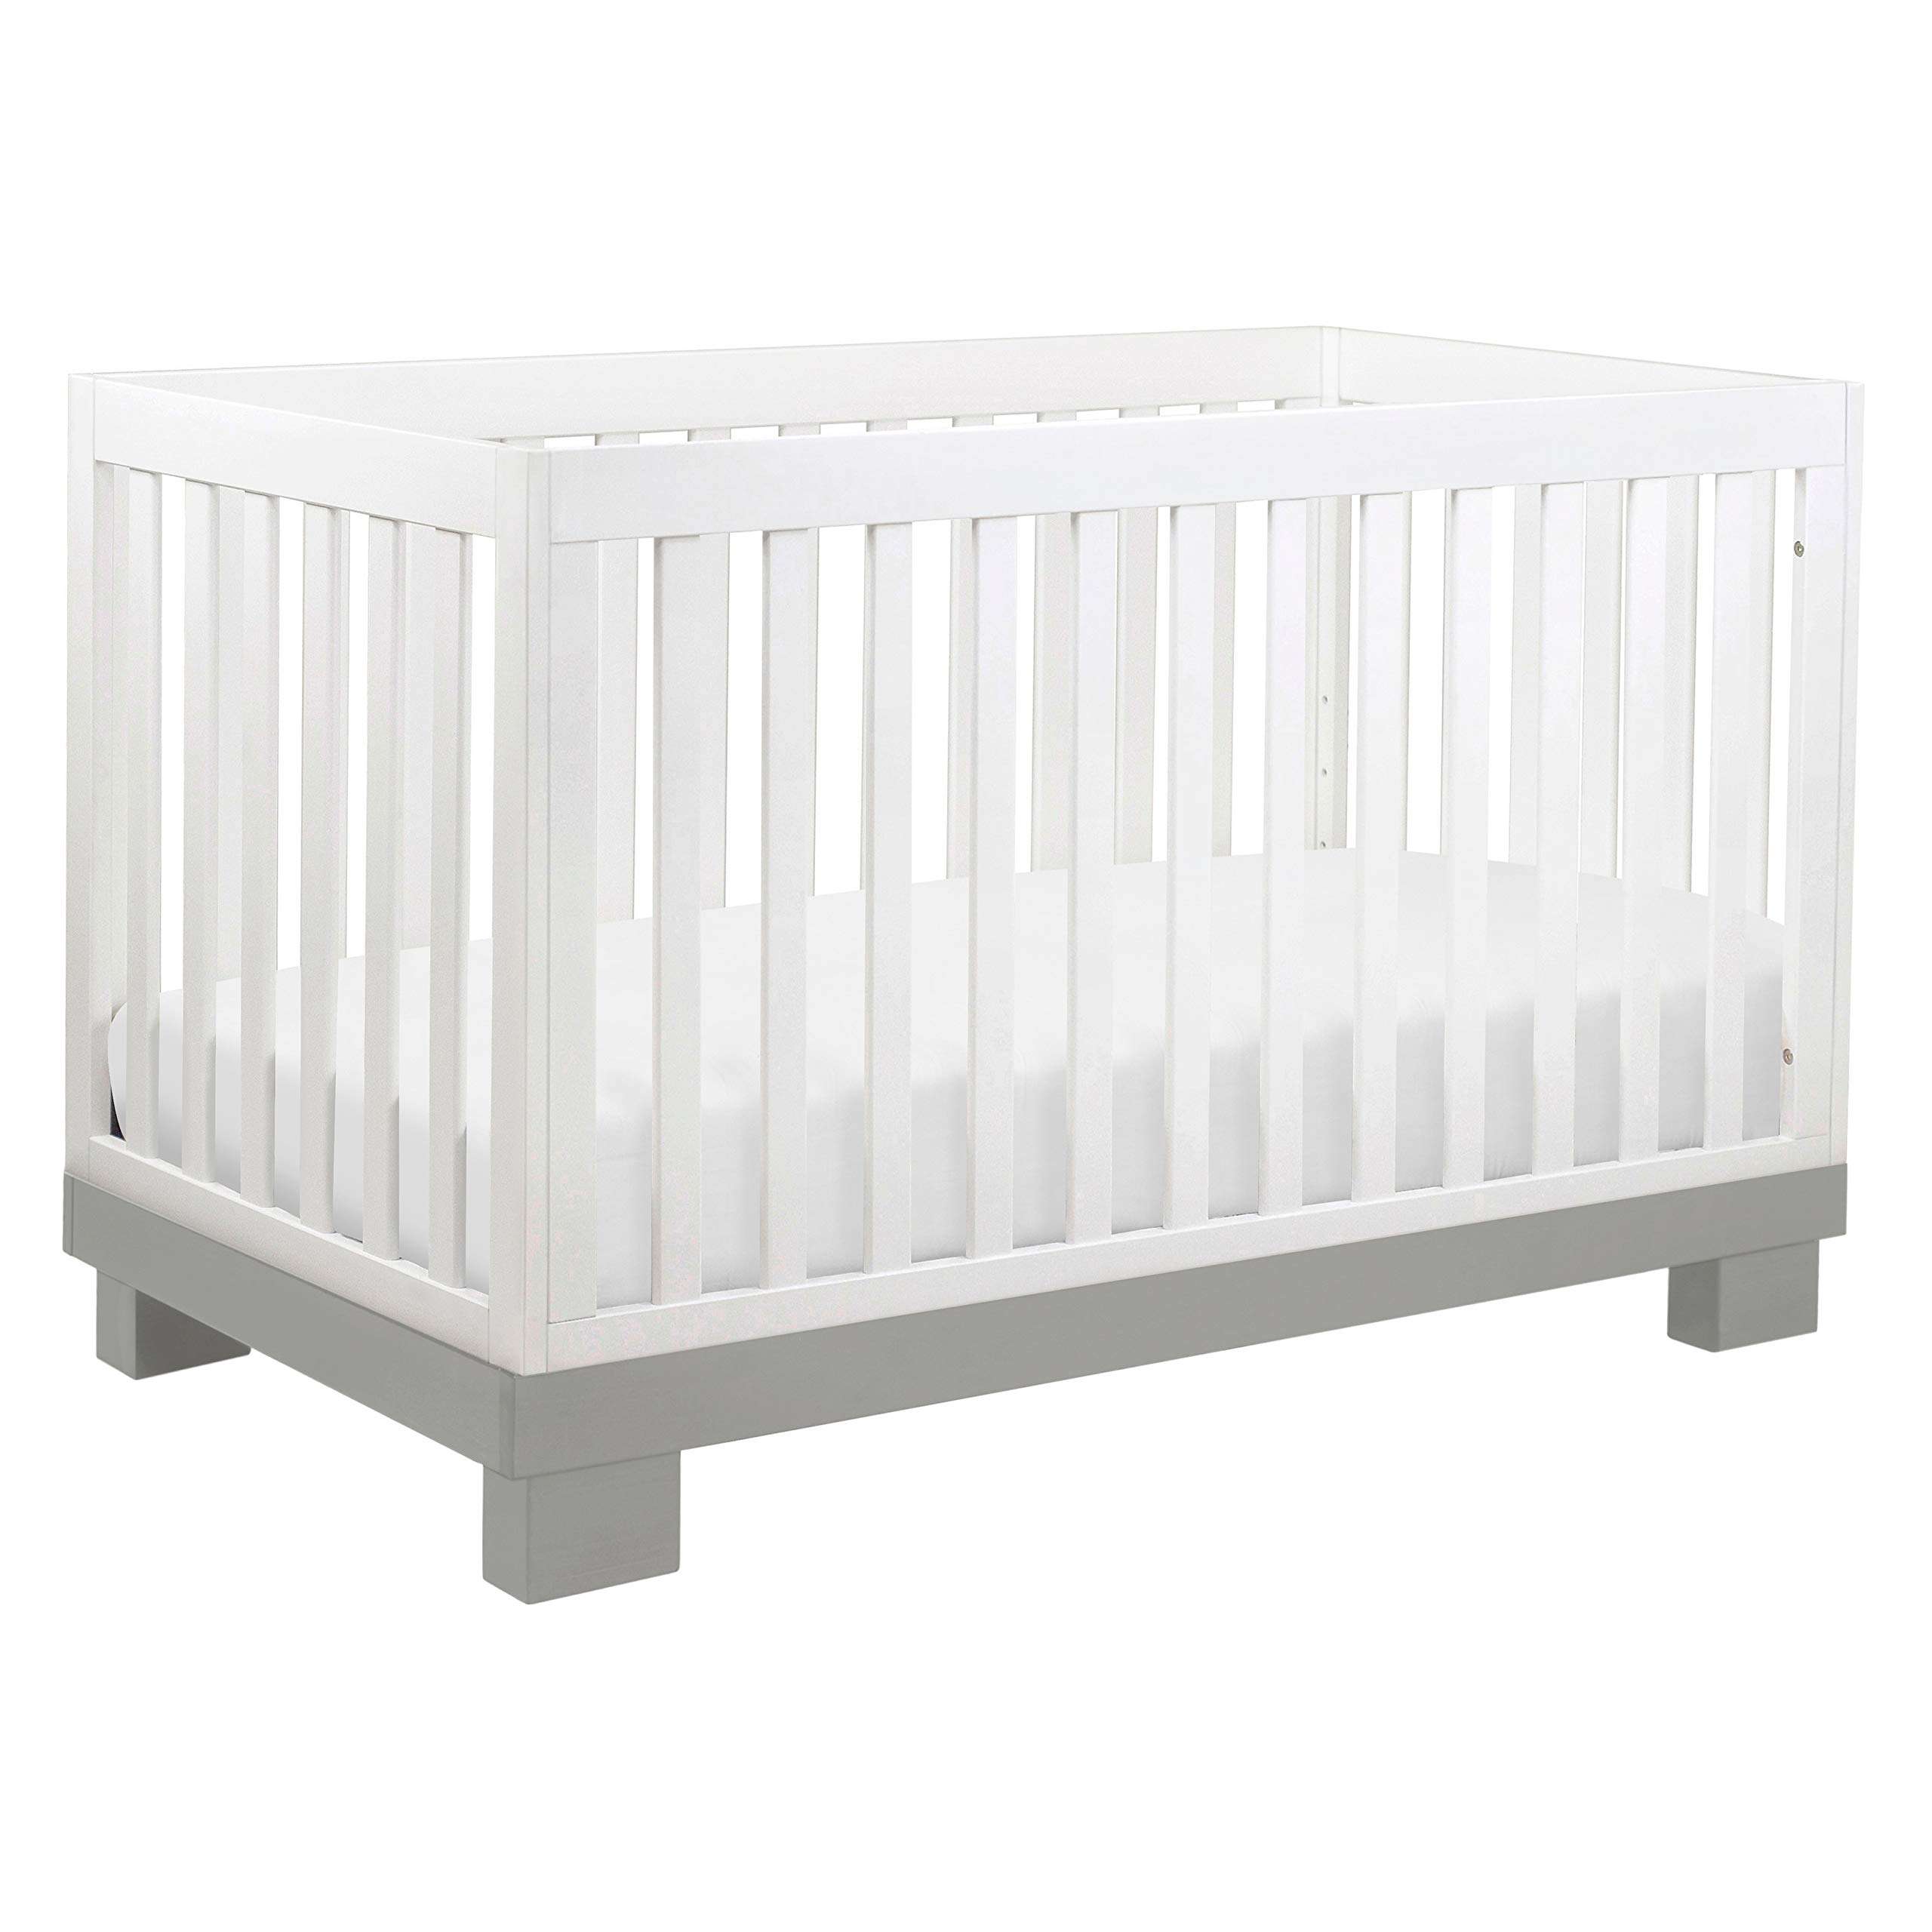 Babyletto Modo 3-in-1 Convertible Crib with Toddler Bed Conversion Kit in Grey and White, Greenguard Gold Certified